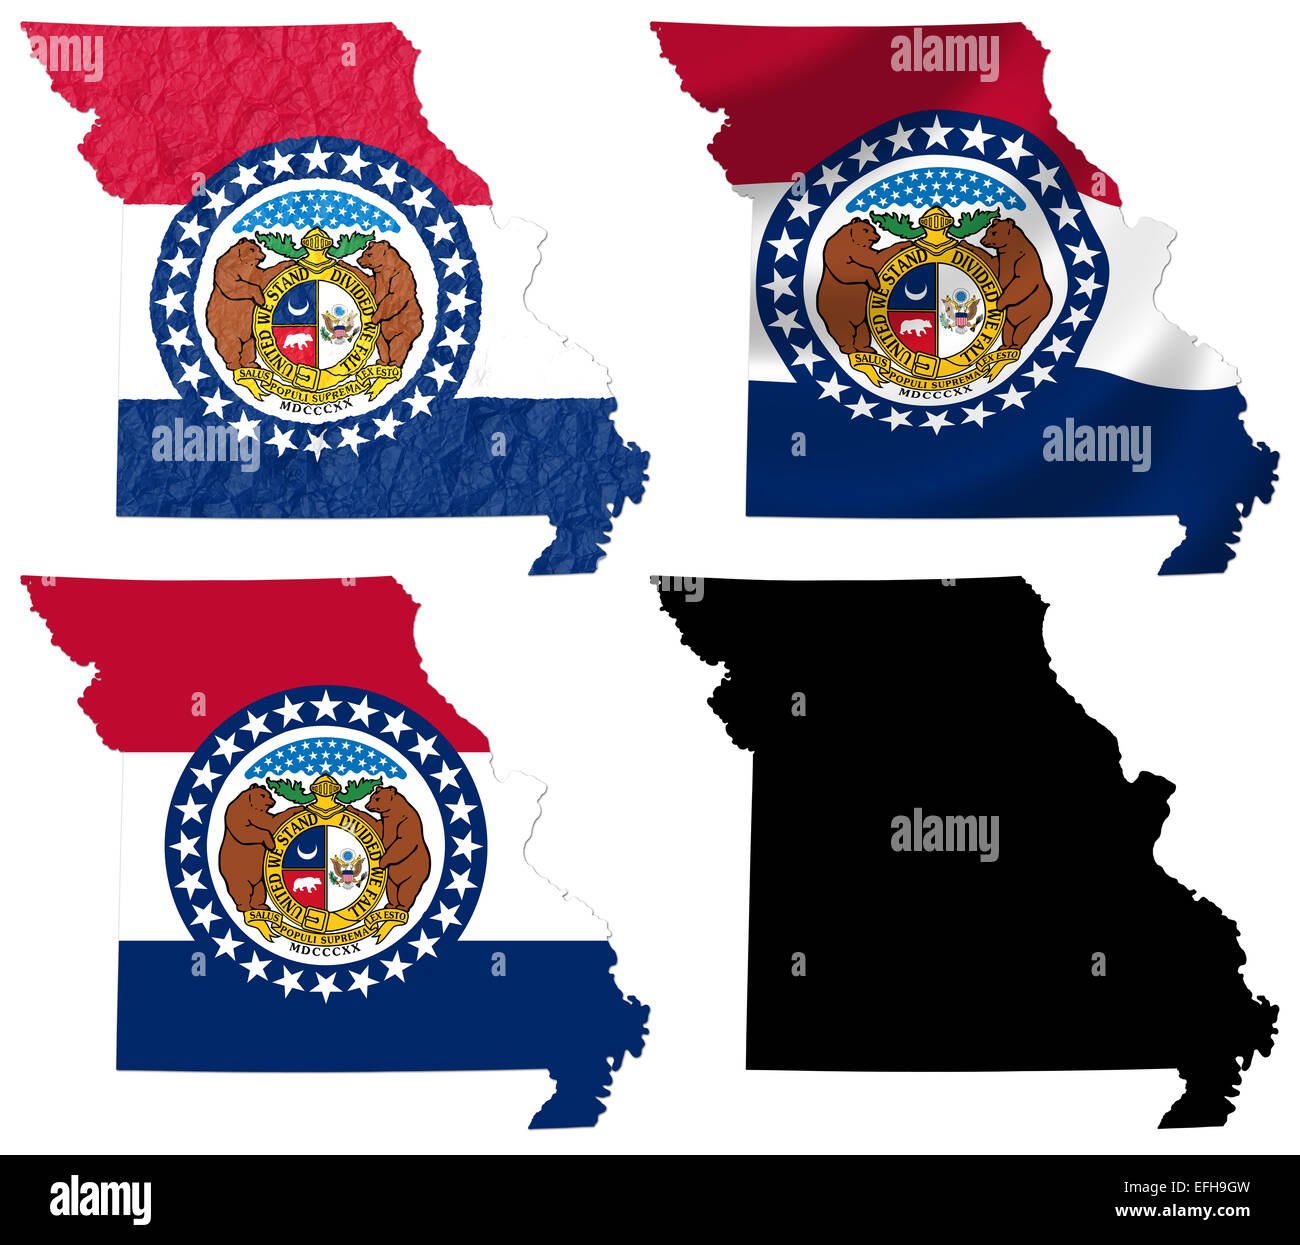 US Missouri state flag over map Stock Photo